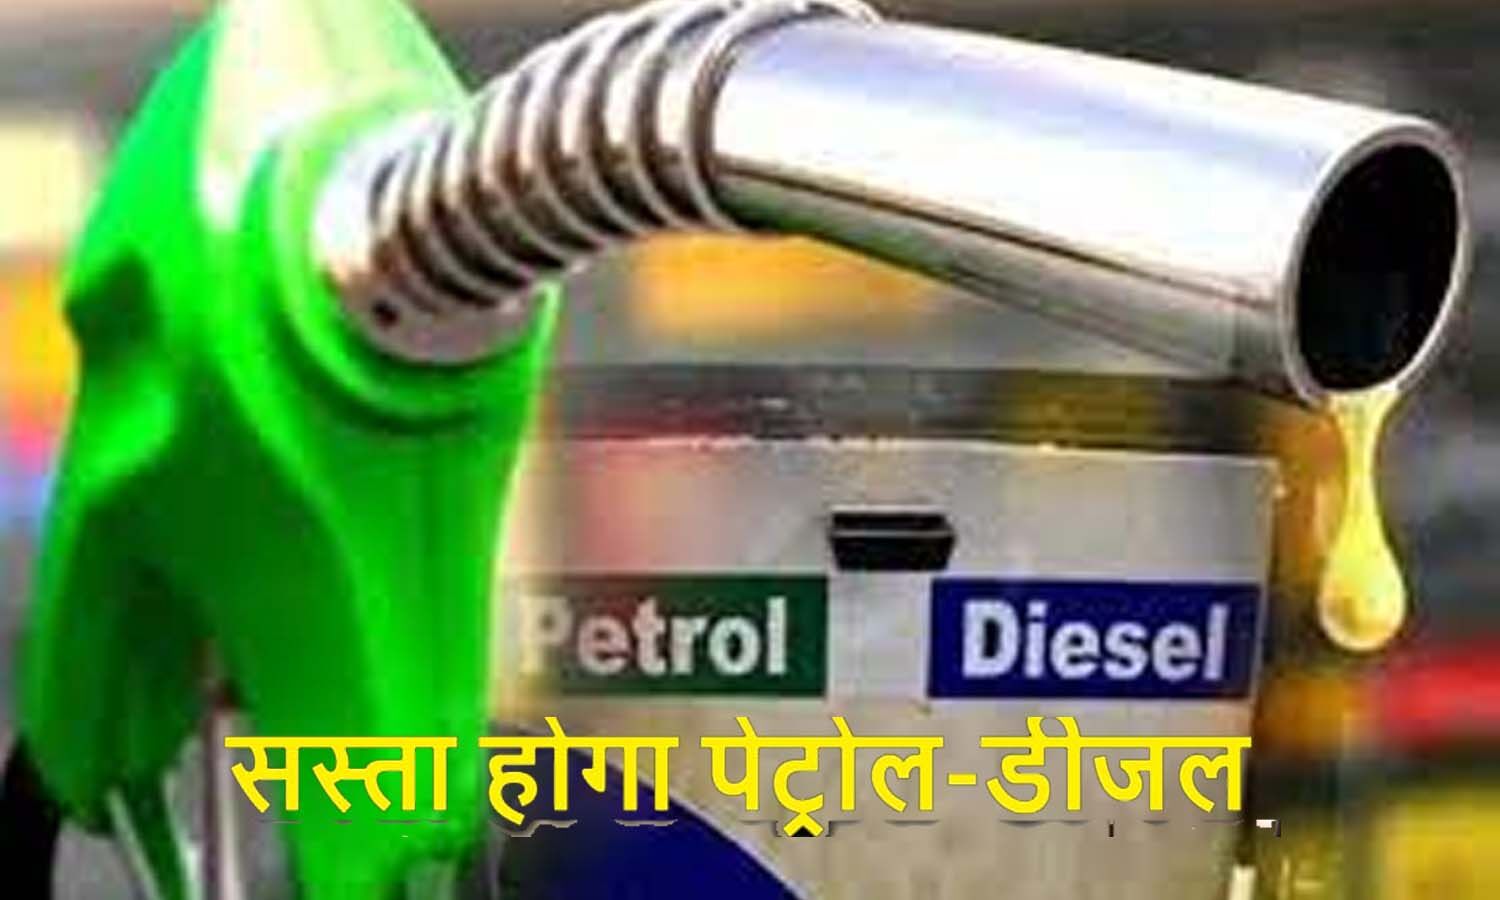 Petrol Diesel Price Today: Petrol-Diesel will come down, prices will come down